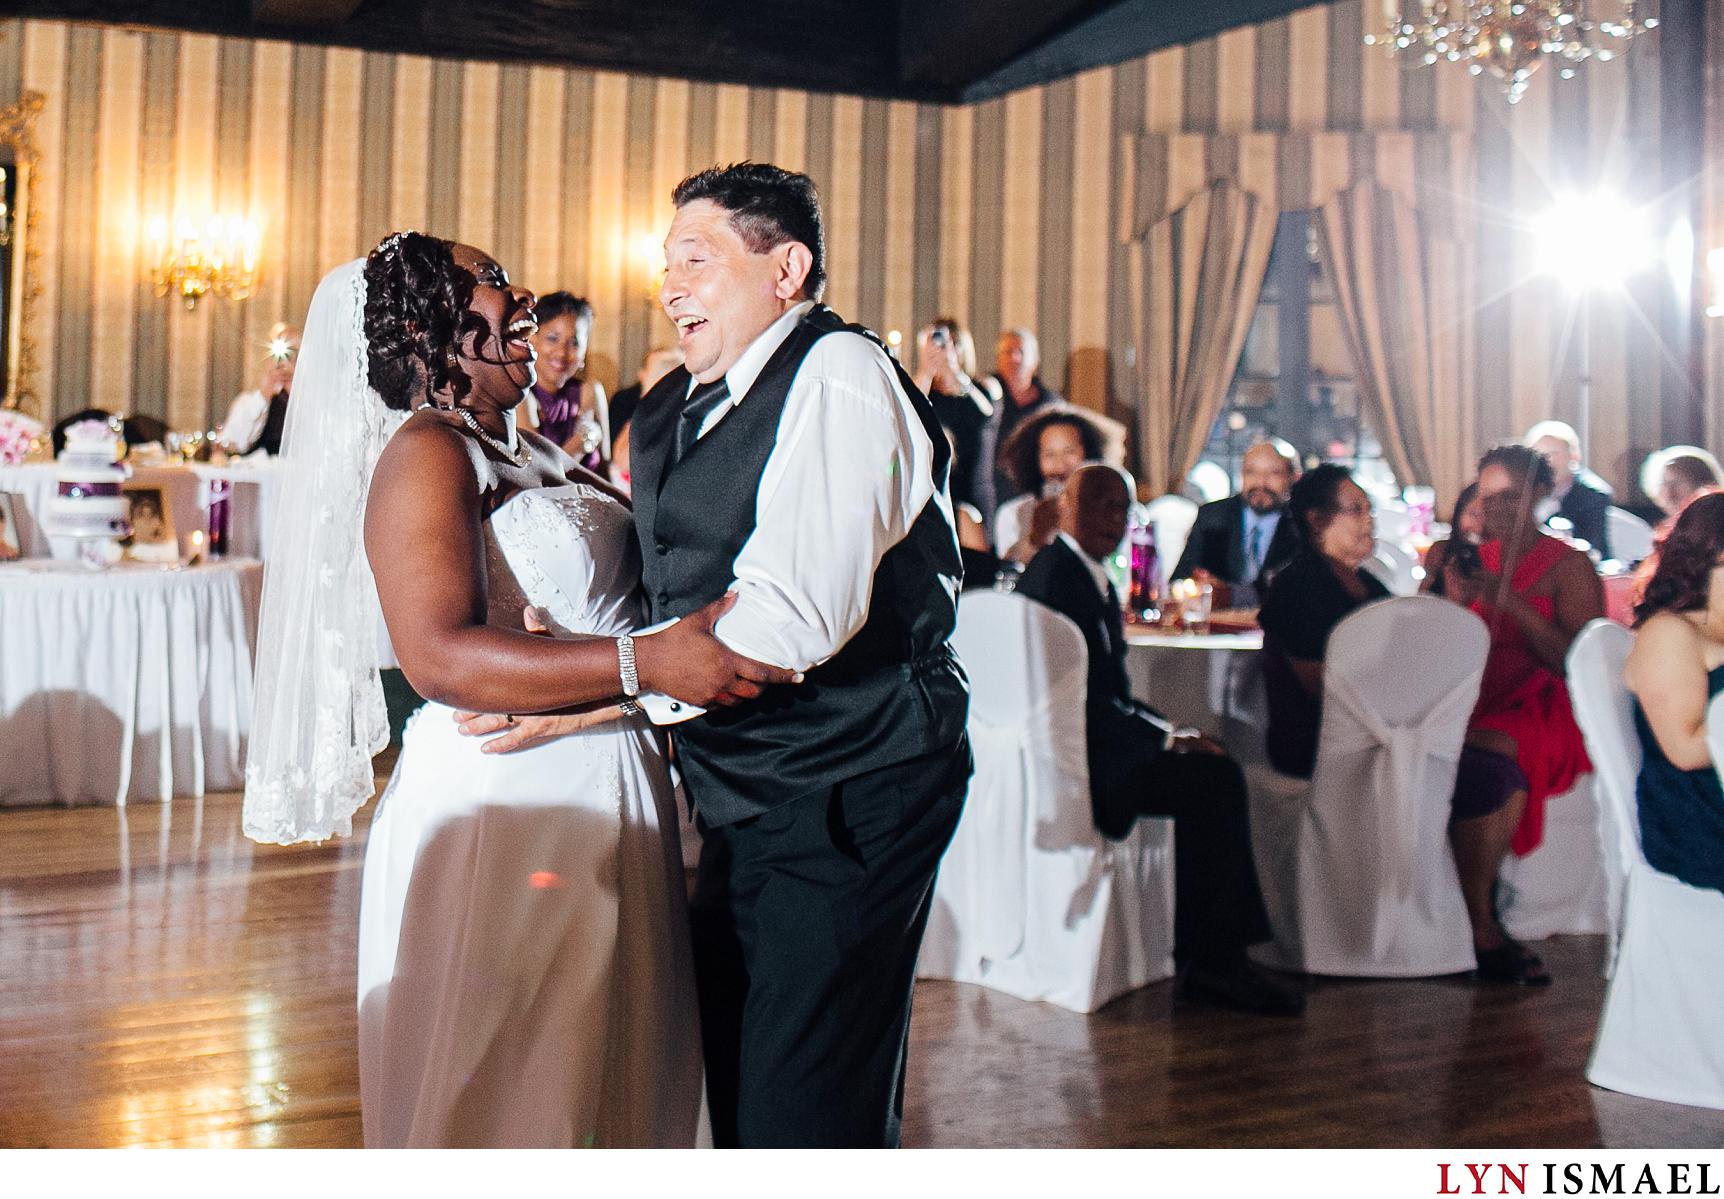 An African-American bride and an Italian-Canadian groom perform their first dance in front of their guests at their Old Mill Inn wedding reception.